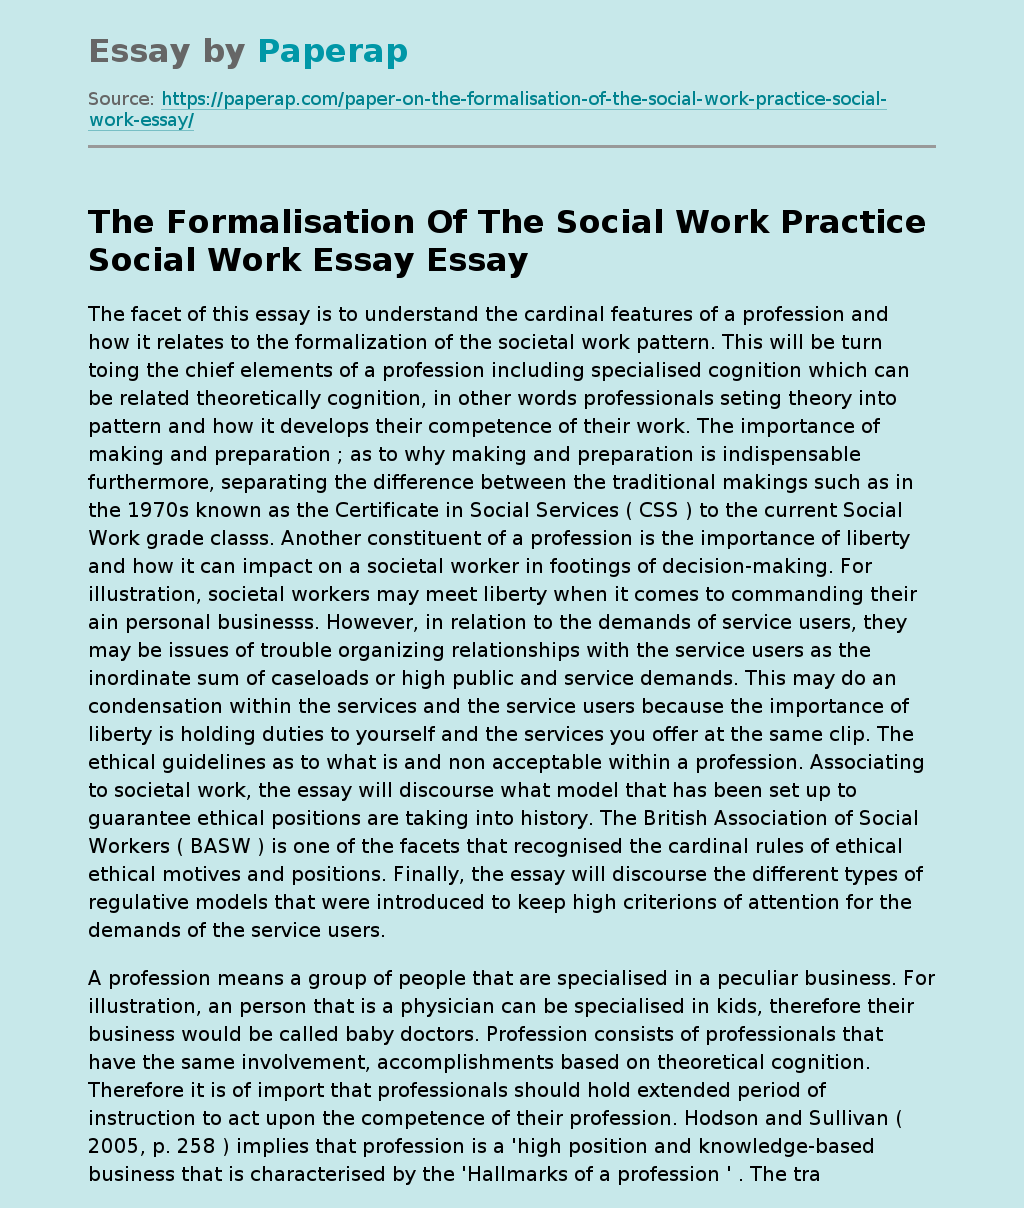 The Formalisation Of The Social Work Practice